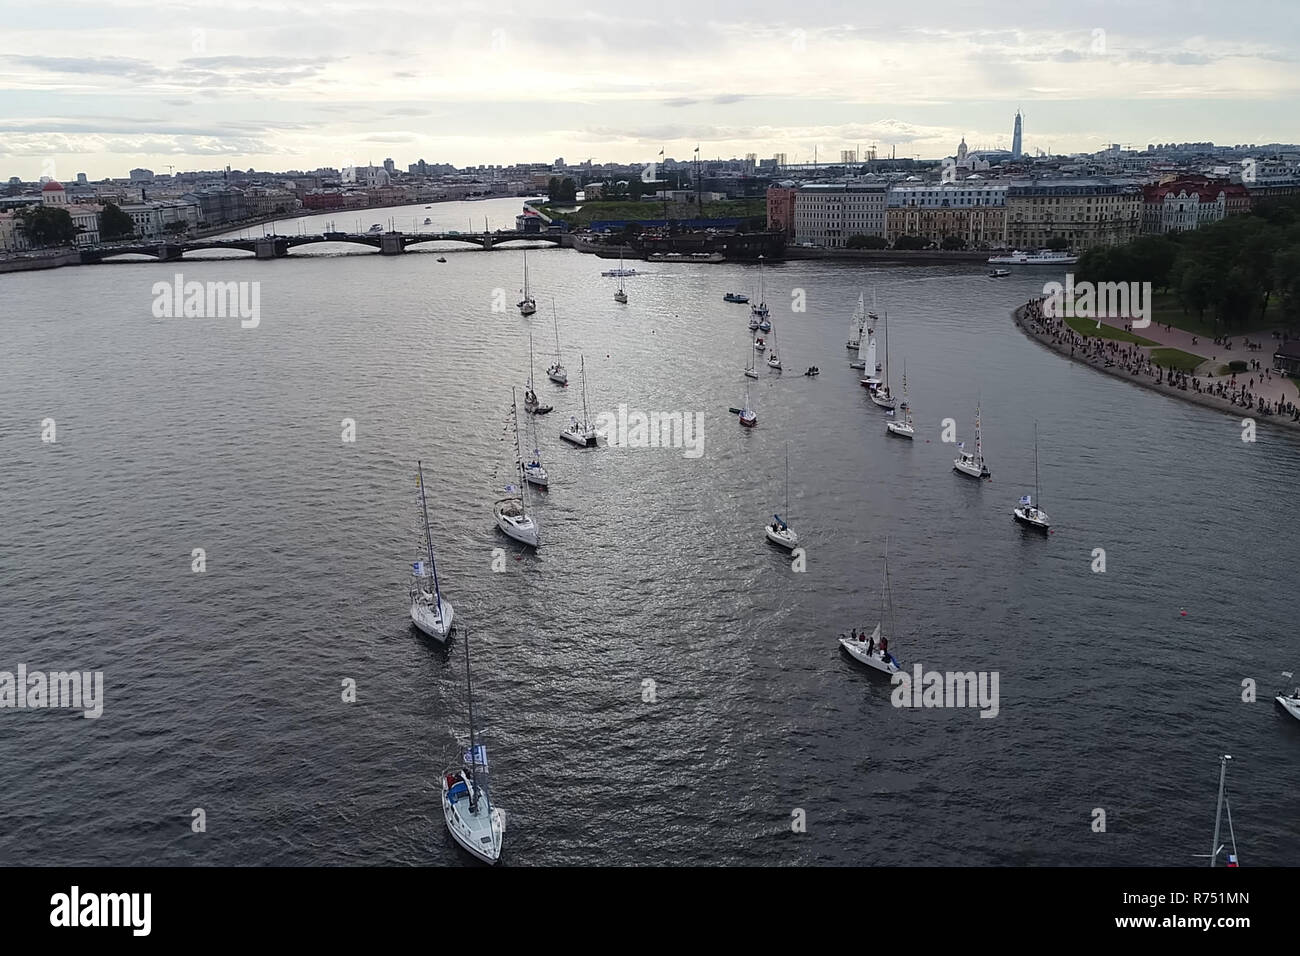 Festival of yachts in St. Petersburg on the river neve. Sailing yachts in the river Stock Photo